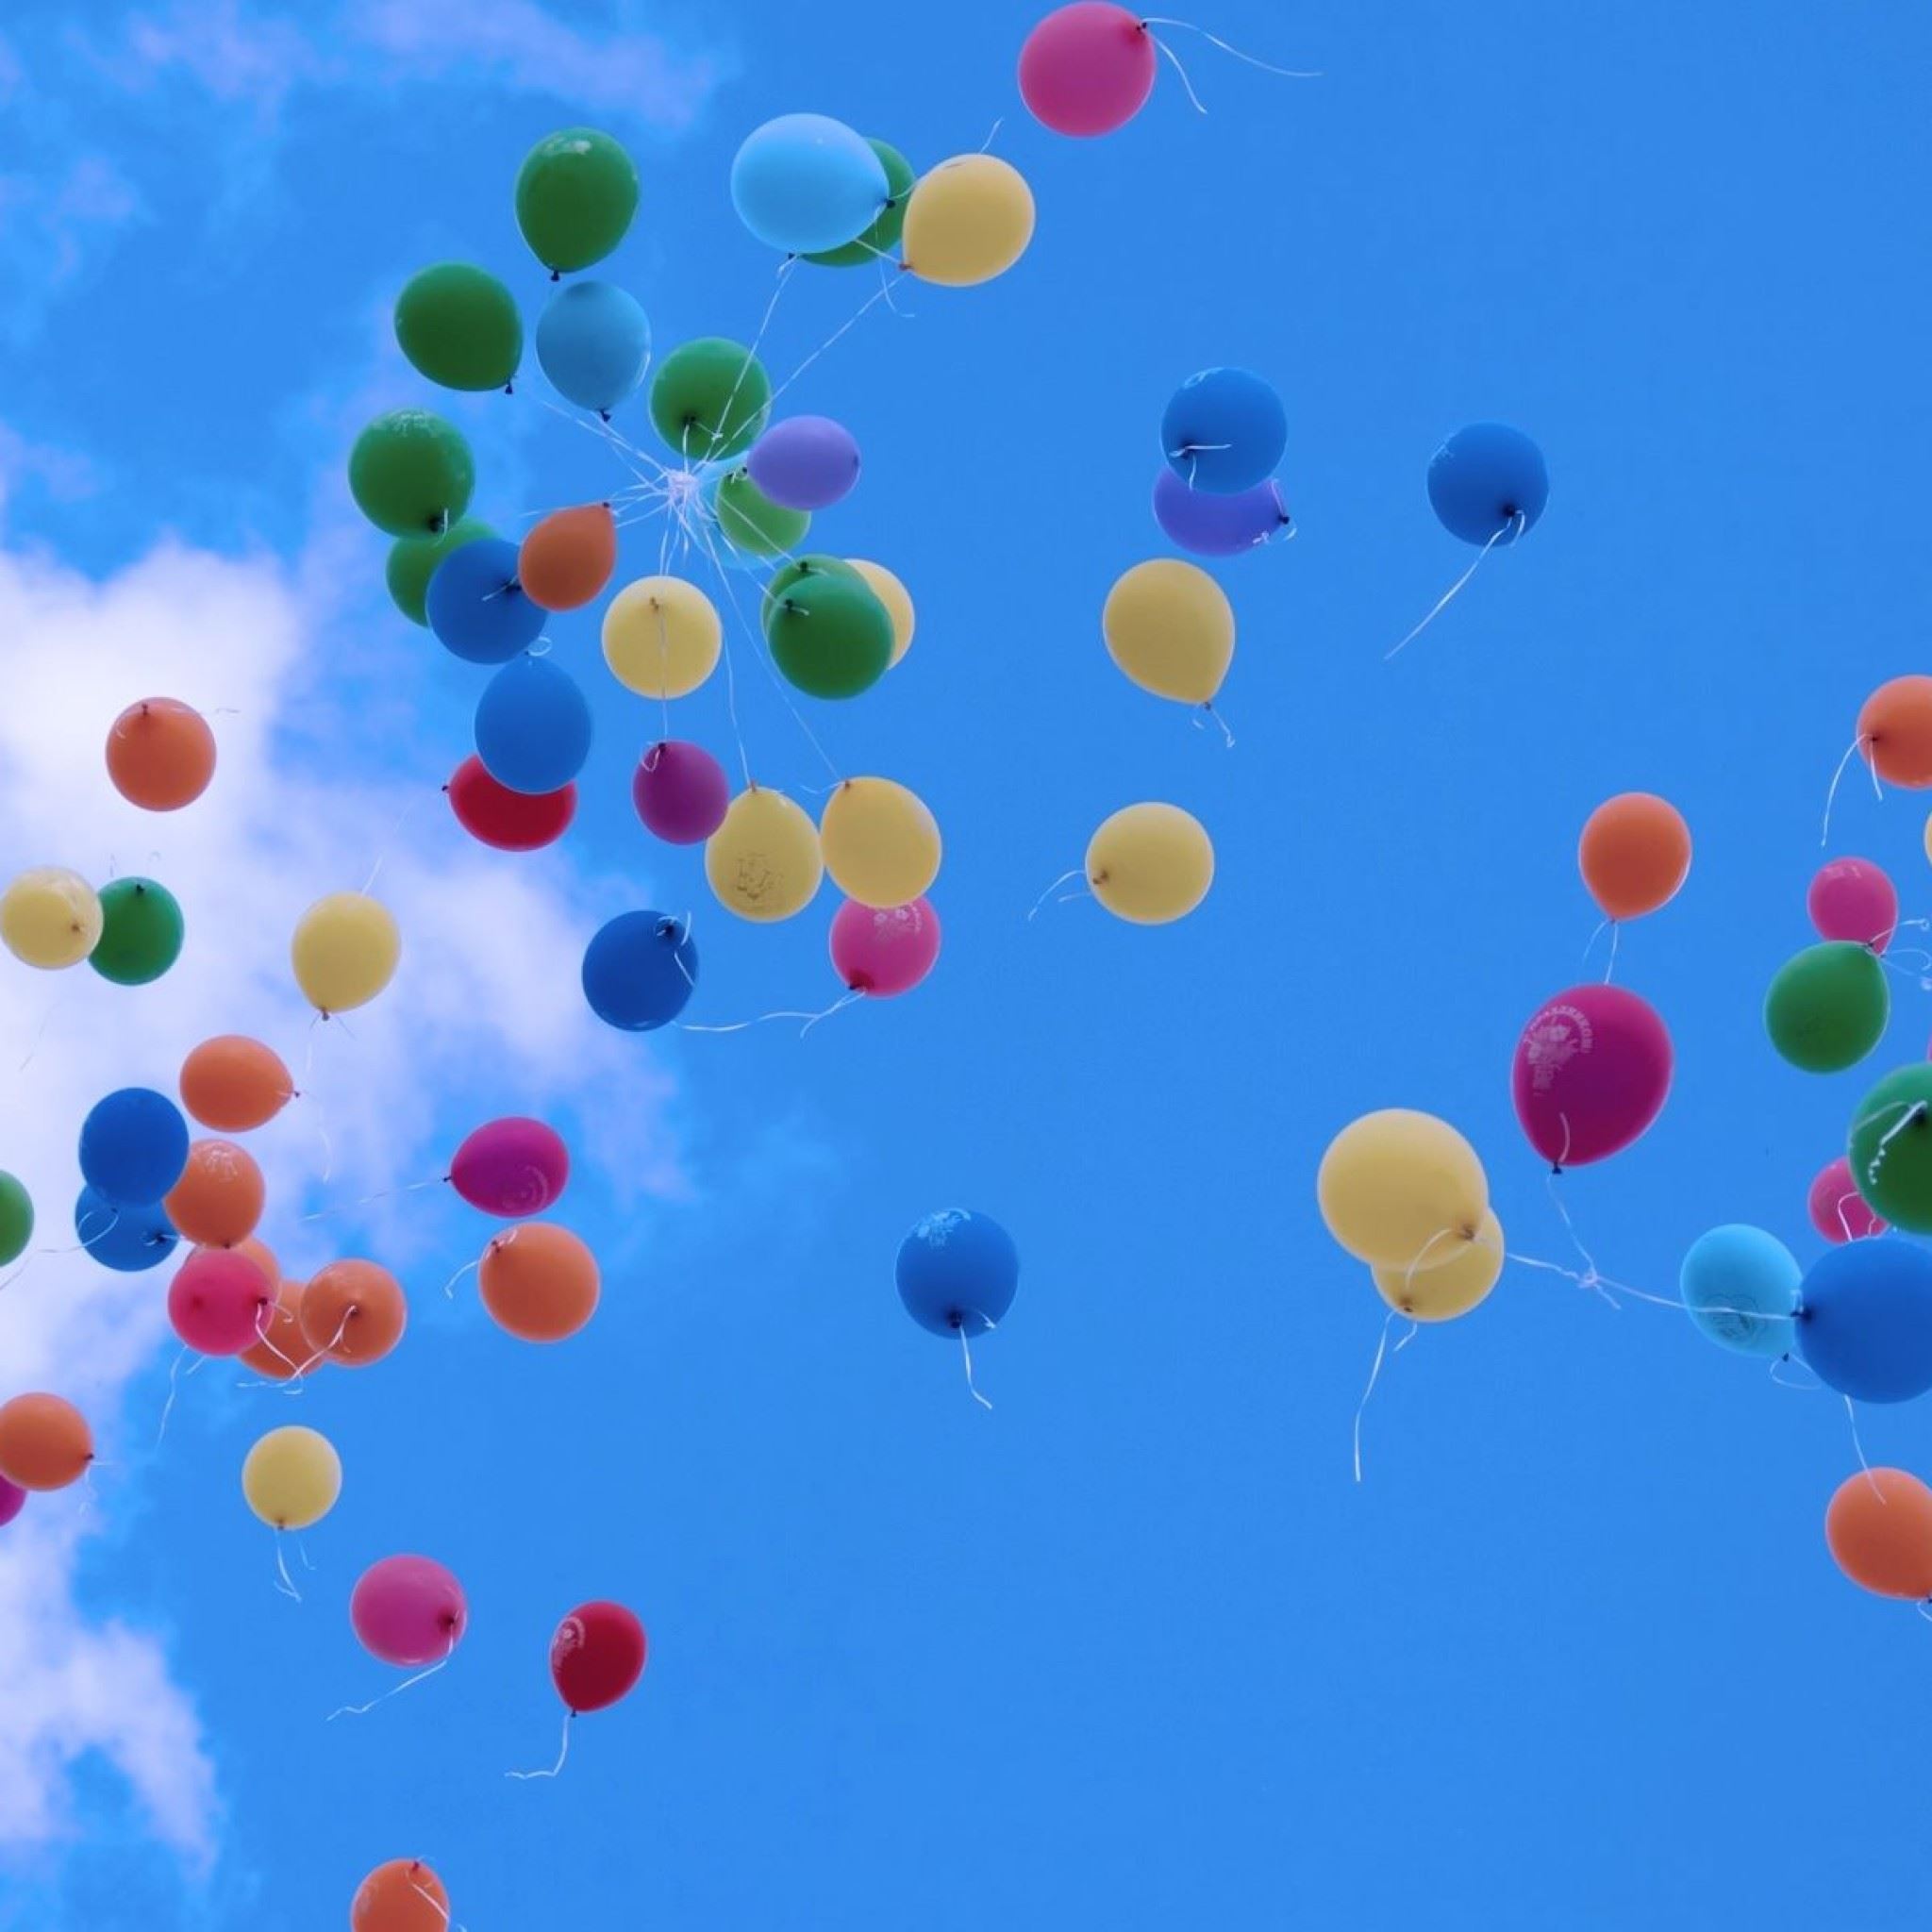 Sky Balloons Wallpapers